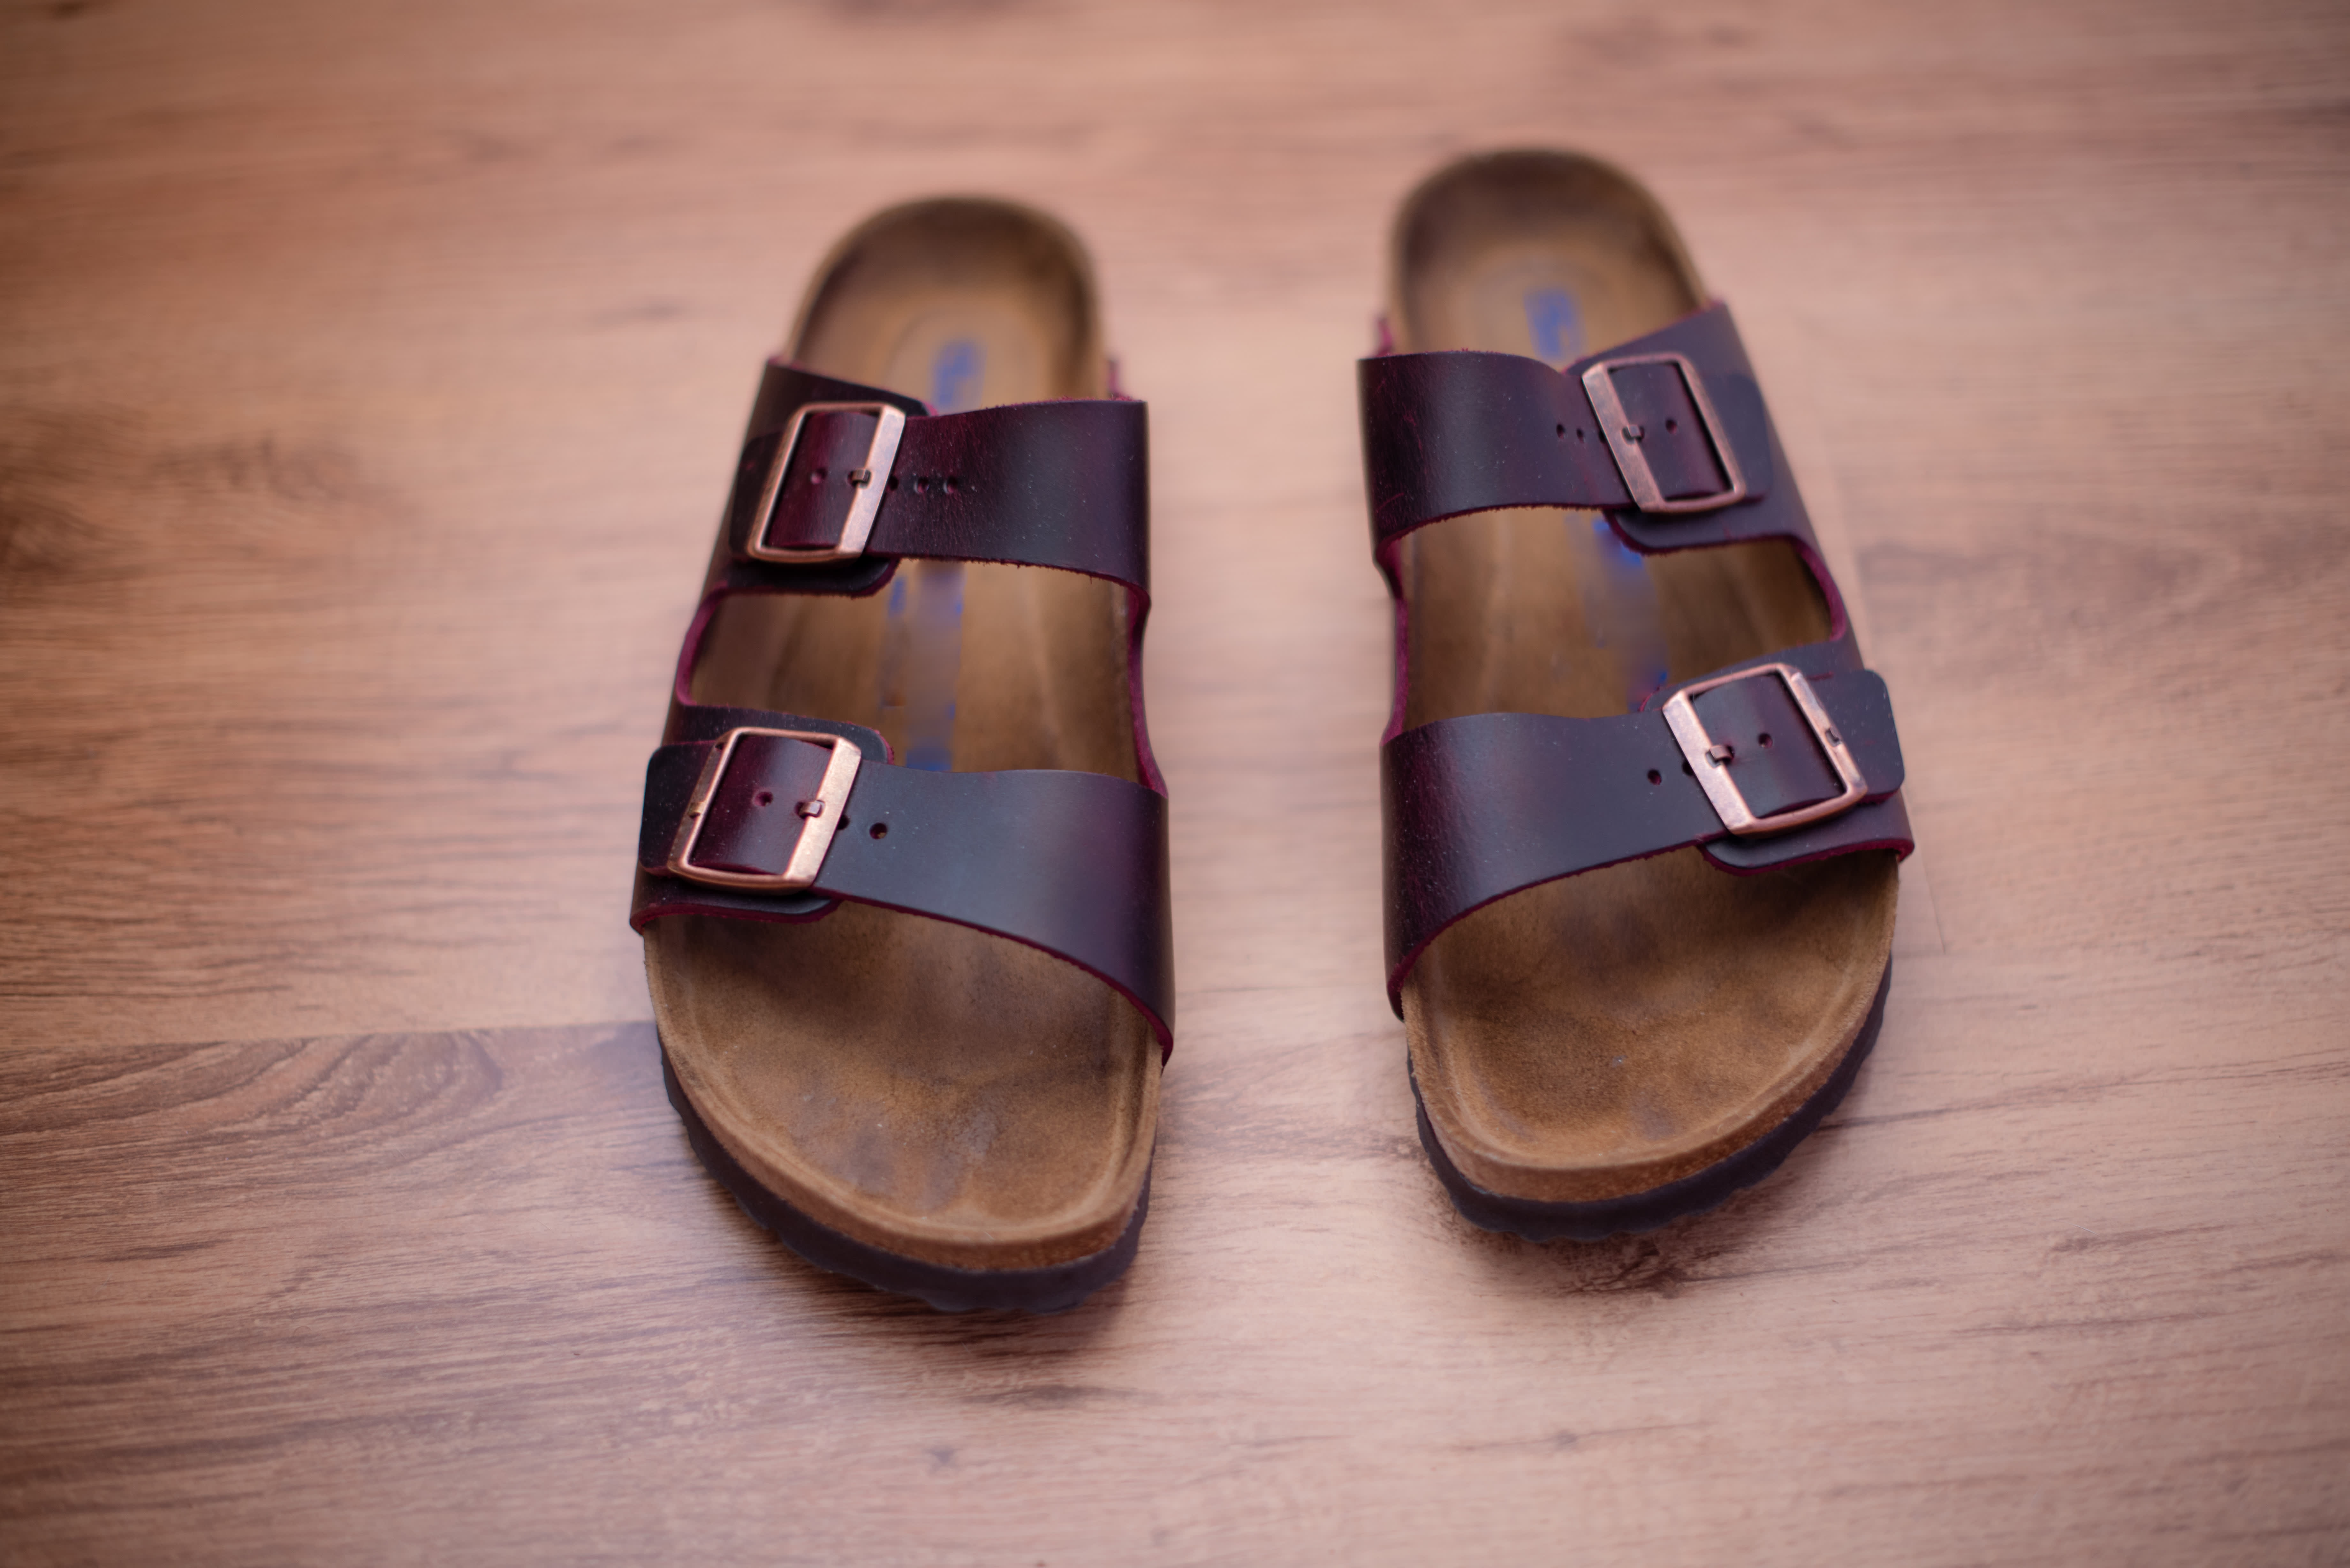 Can anyone help me identify my birks? I don't have the original